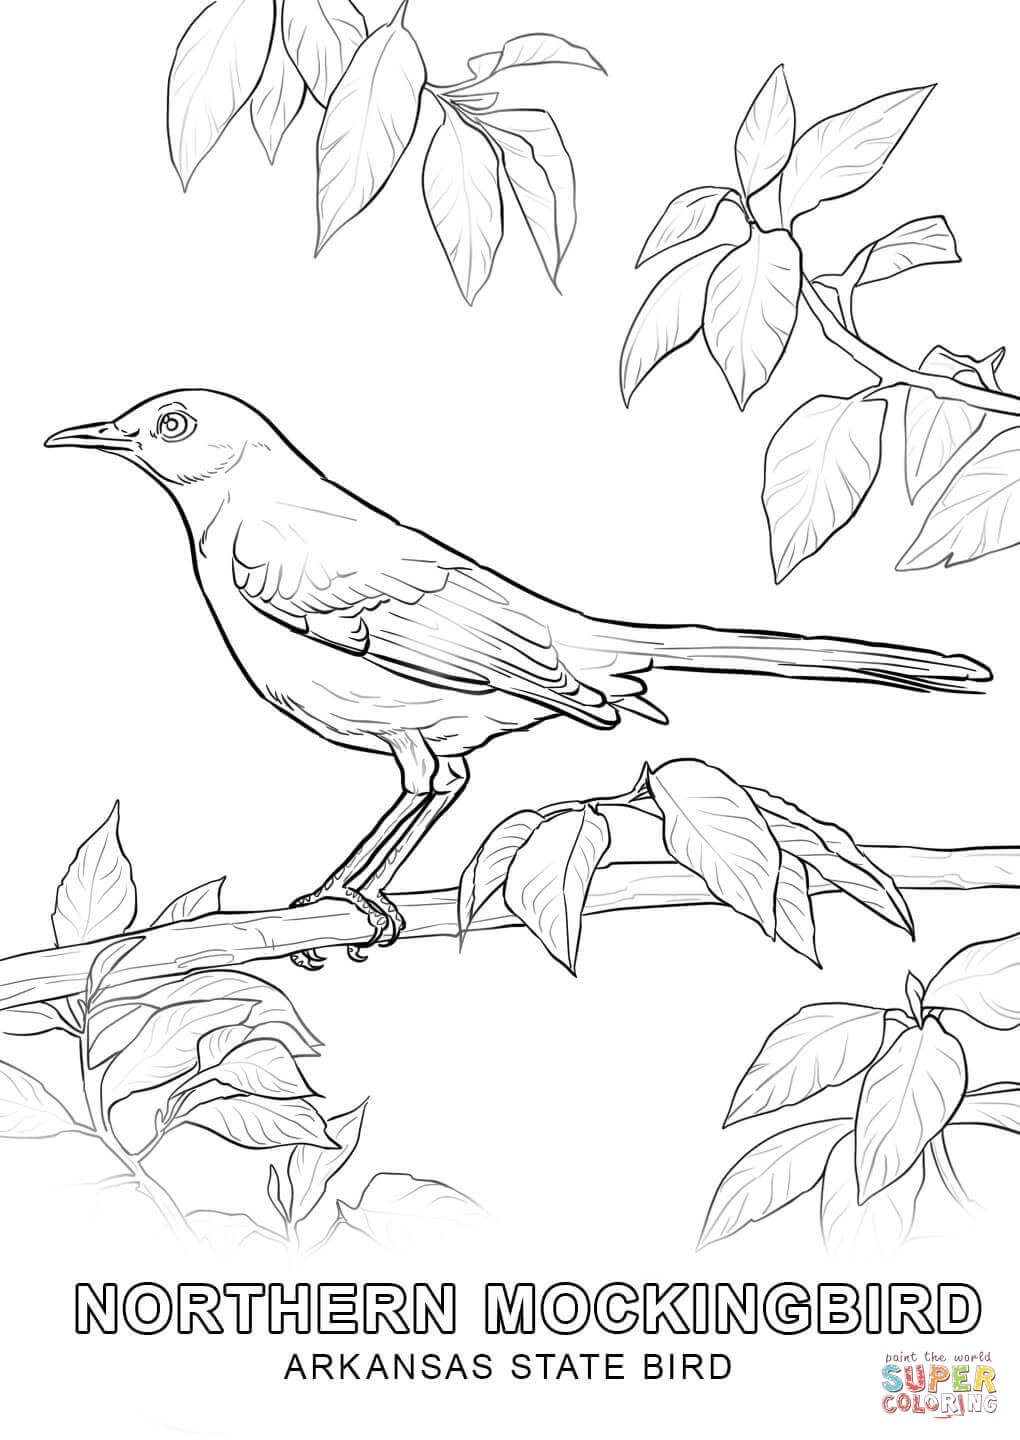 Arkansas State Bird coloring page | Free Printable Coloring Pages